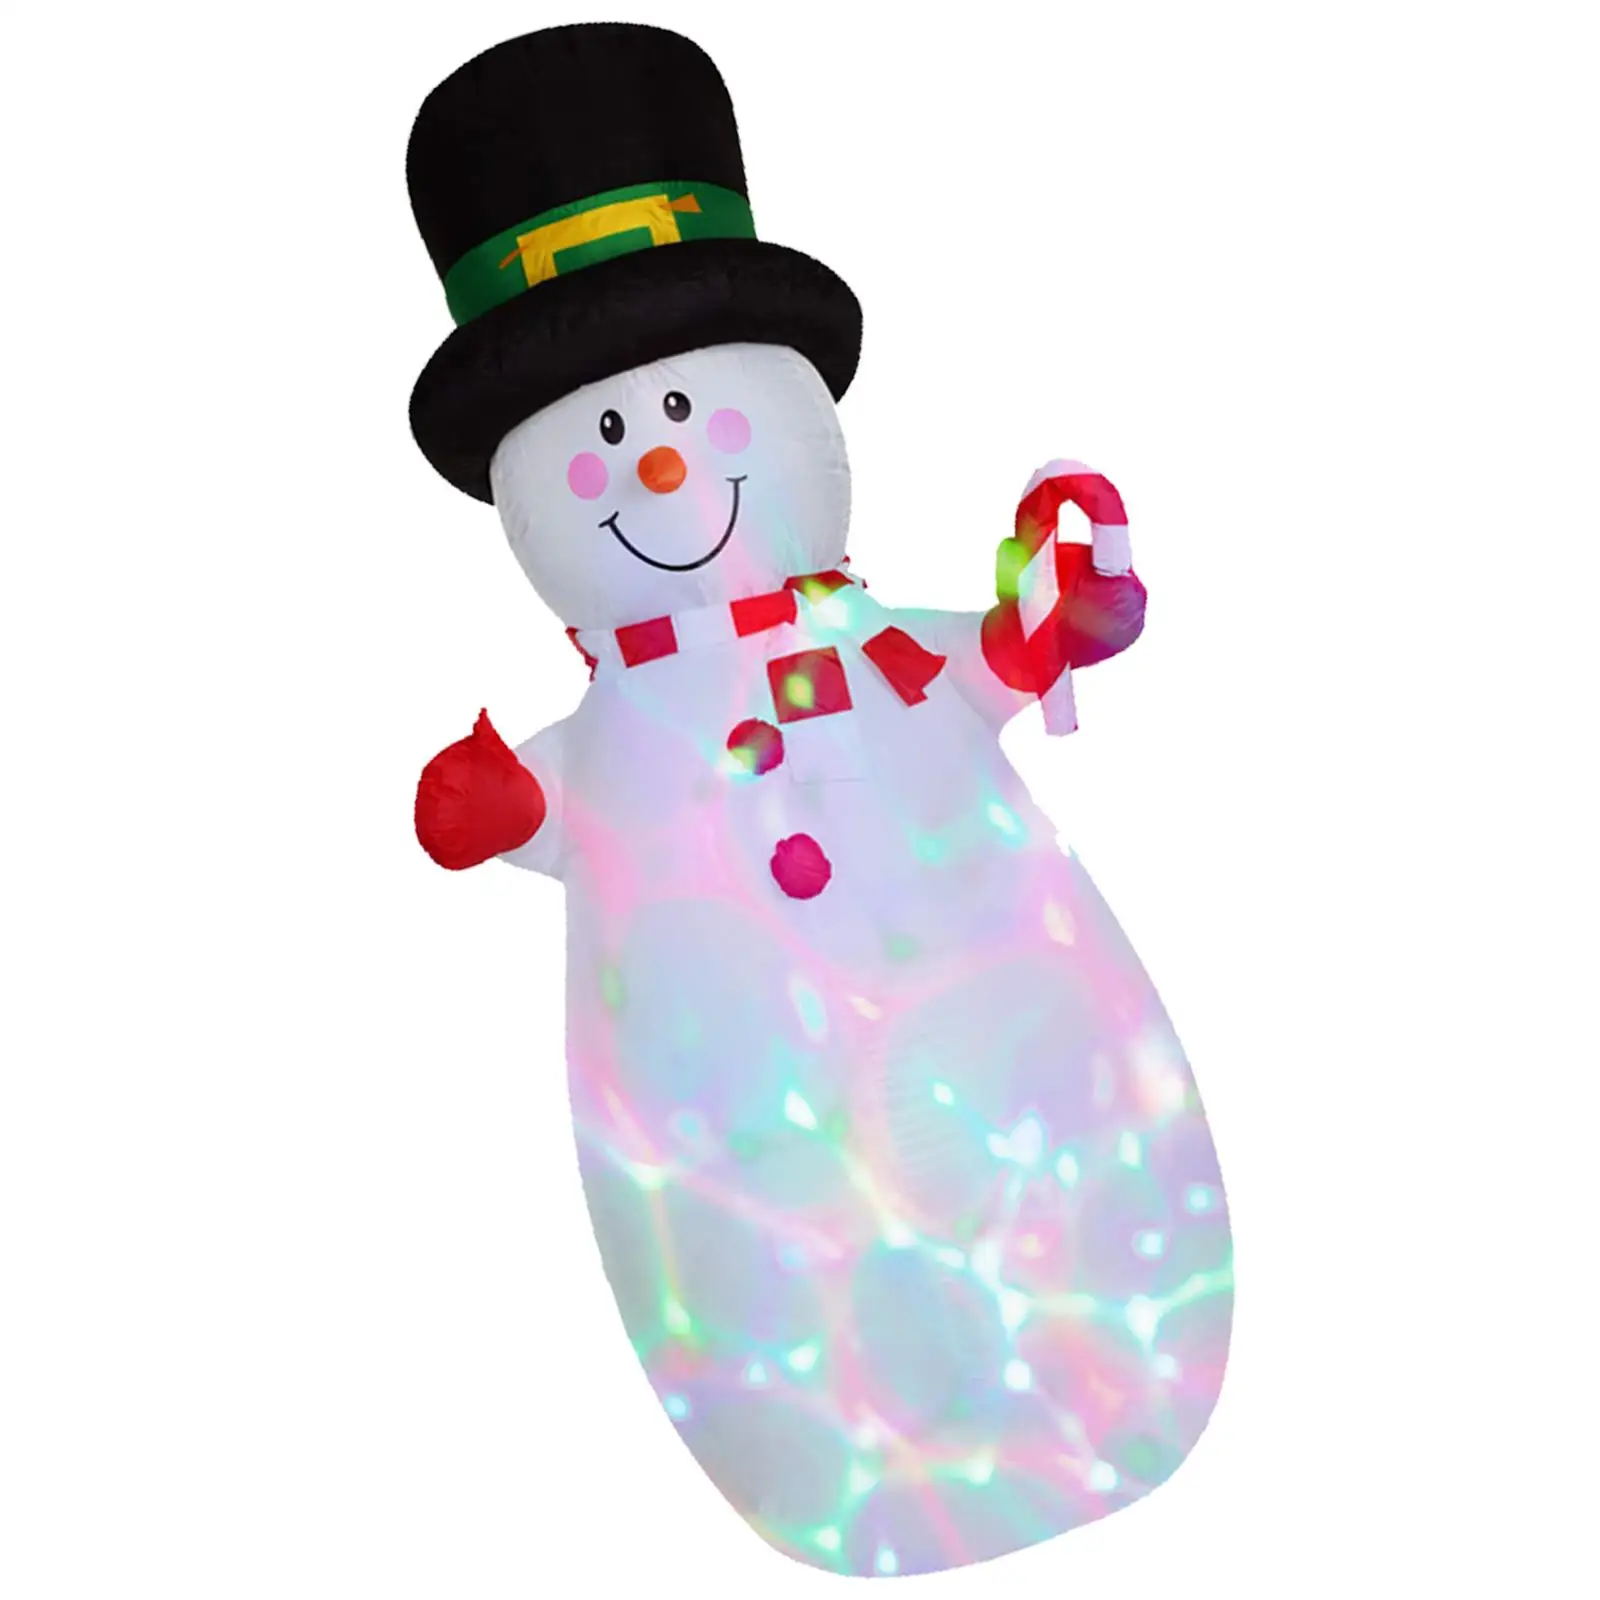 6ft Inflatable Snowman Christmas Decoration for Garden Lawn Outdoor Yard